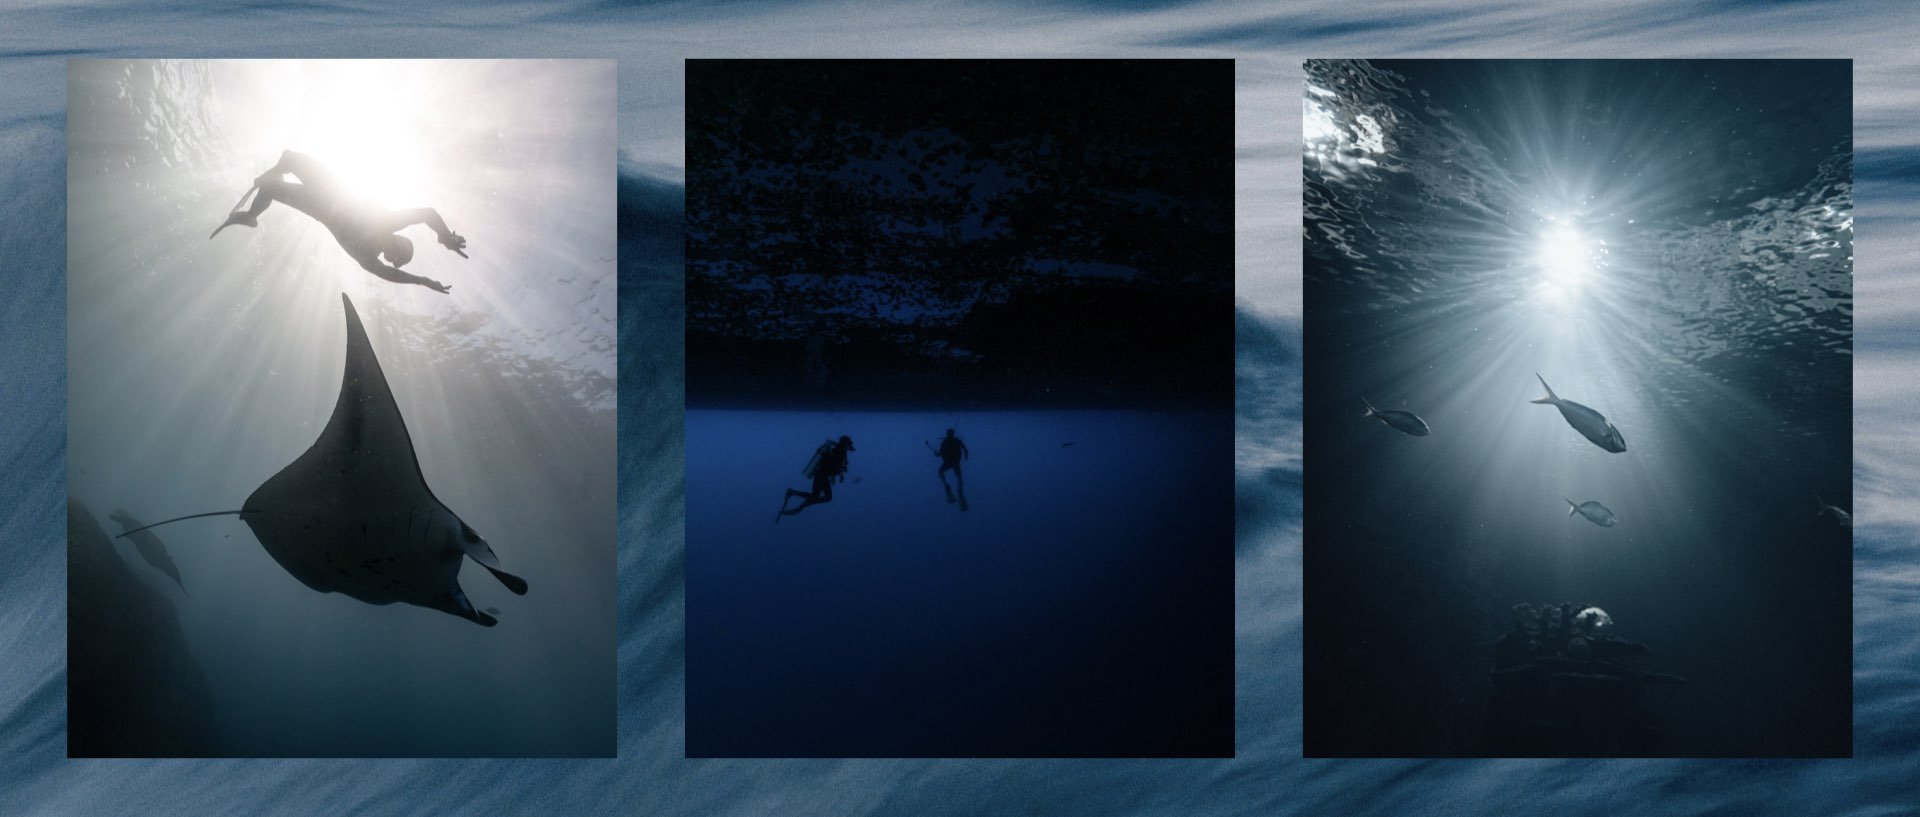 ‎Director's Treatment Template - Into the Blue .‎028.jpeg